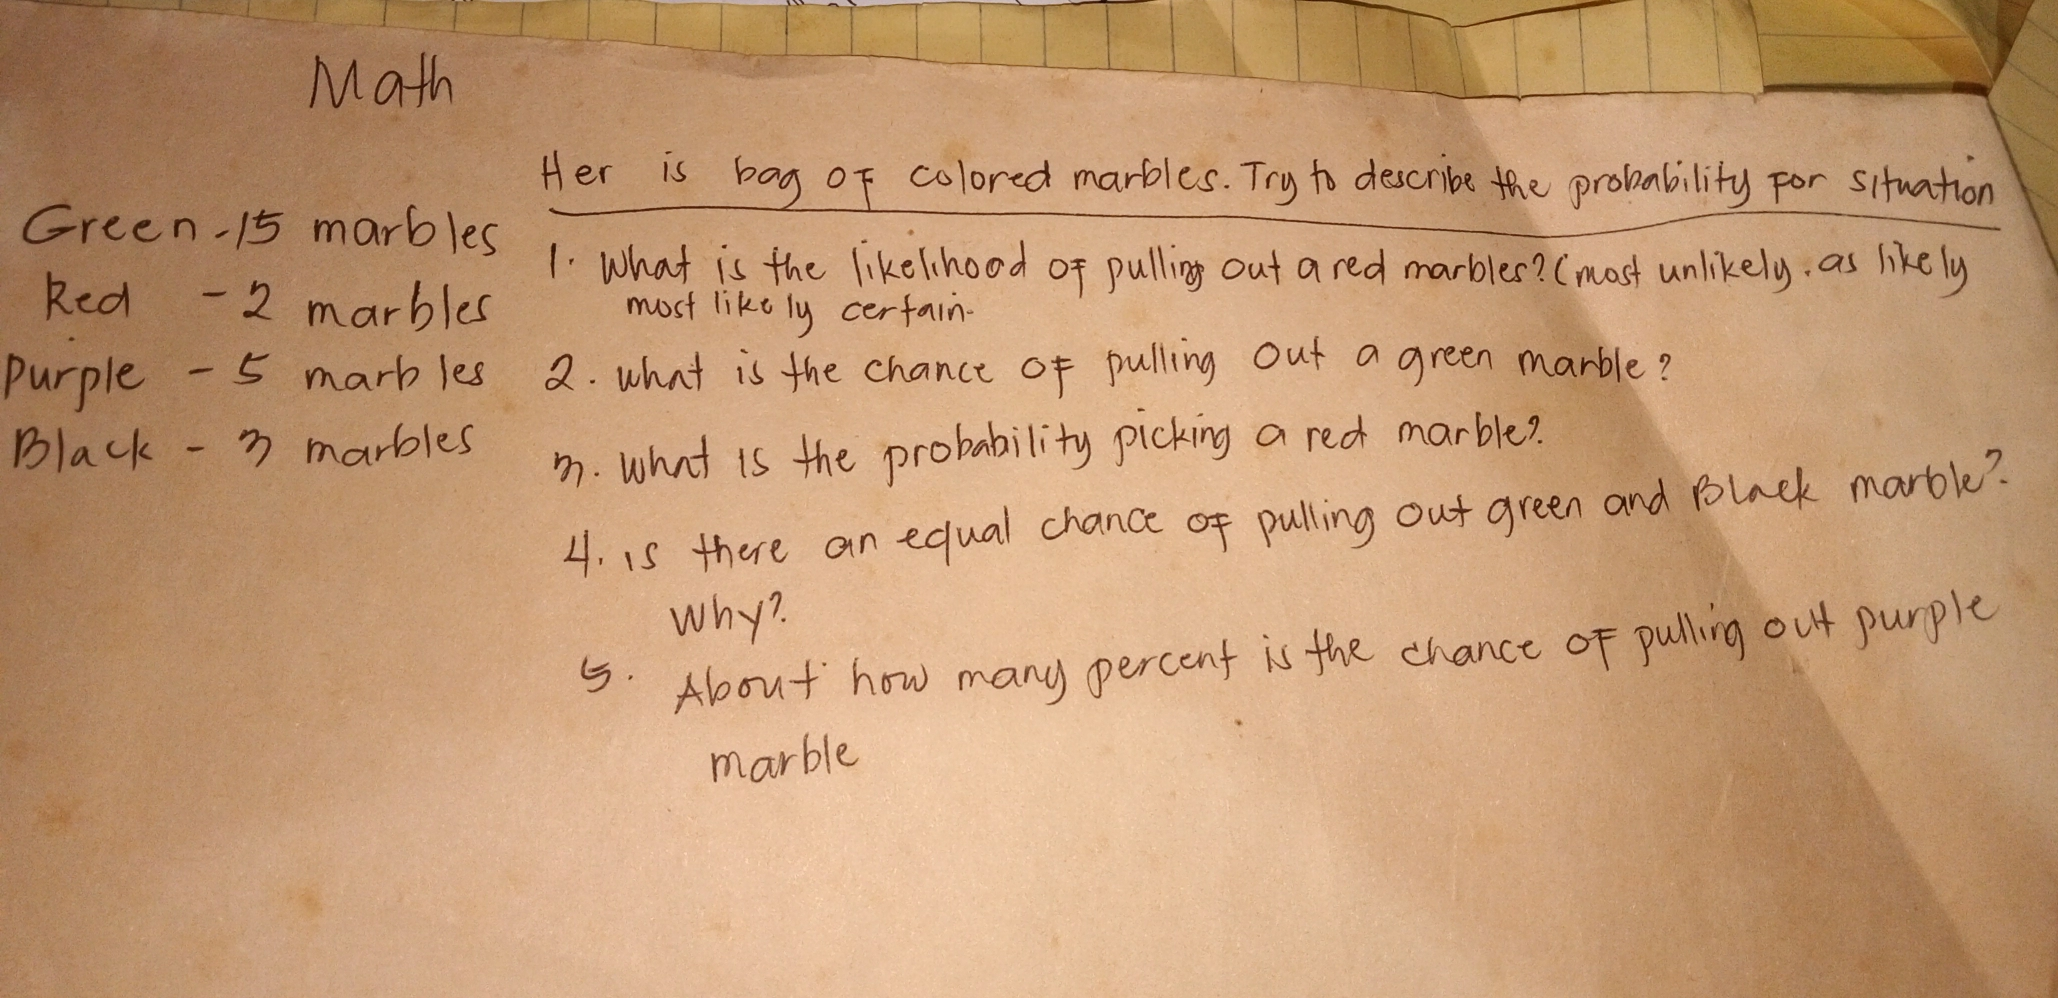 Math Green -15 marbles 1. What is the likelinood of pulling out a red marbles? most unlikely. as likely Red -2 marbles most like ly certain- Purple -5 marb les 2. what is the chance of pulling out a green marble? Black - 3 marbles 3. What is the probability picking a red marble? 4. is there an equal chance of pulling out green and Black marble? Why? 5. About how many percent is the chance of pulling out purple marble